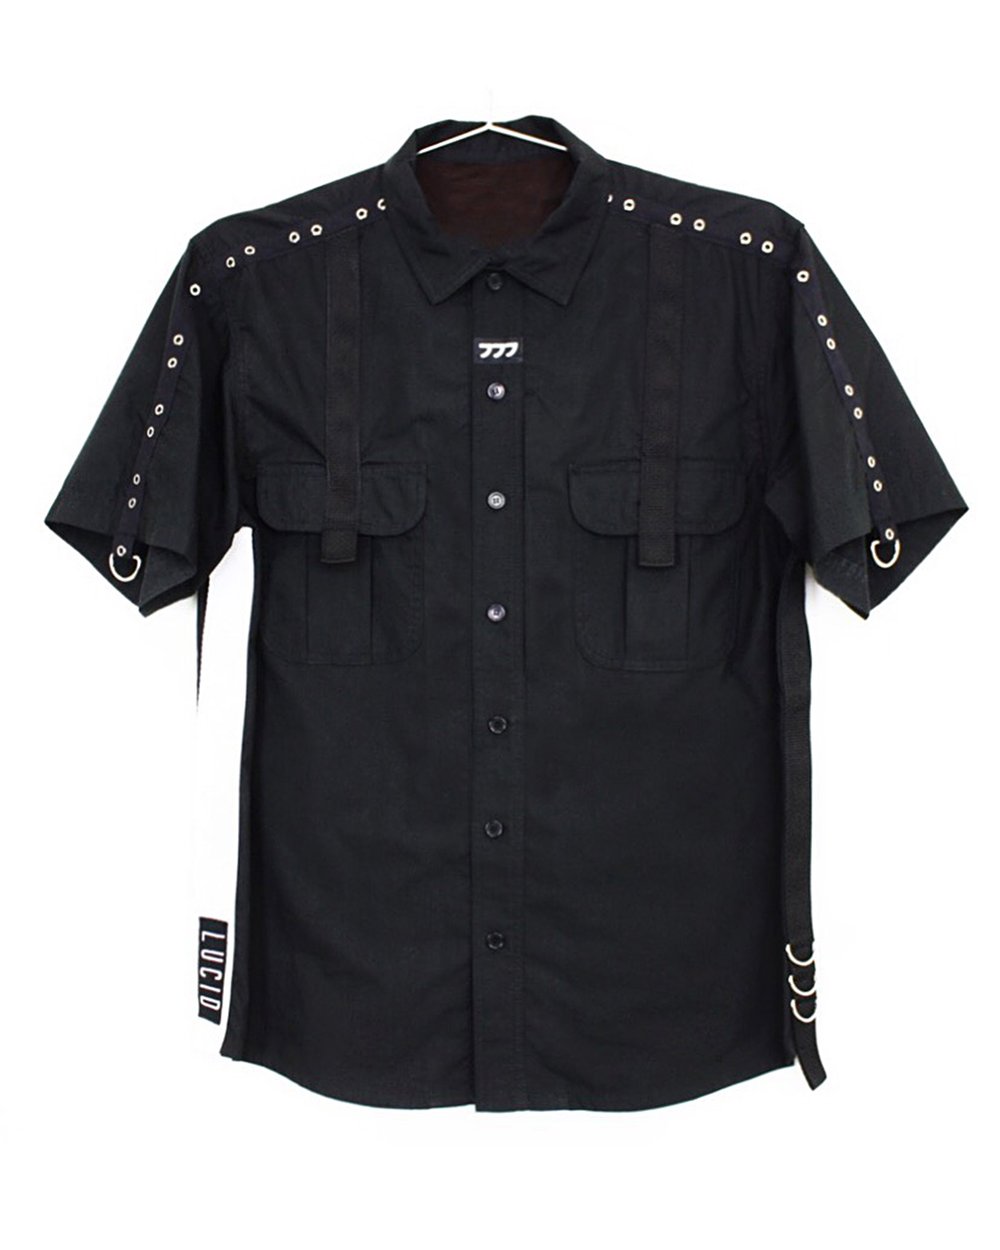 Image of "FULL METAL" BUTTON UP SHIRT